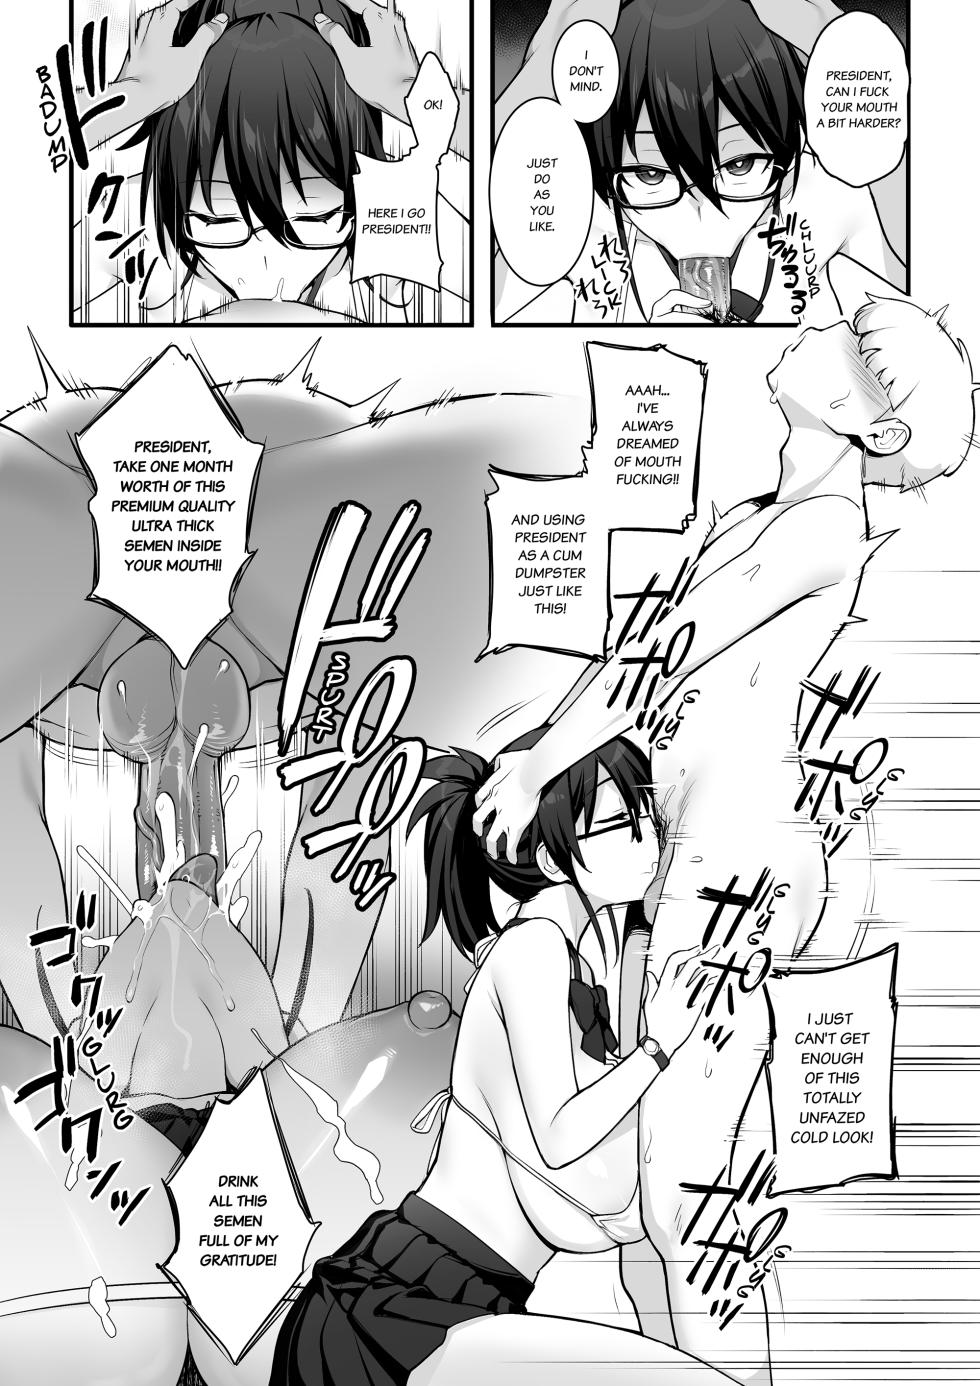 [TRY] The New President of The Public Morals Committee Got Really Massive Breasts [English] - Page 27